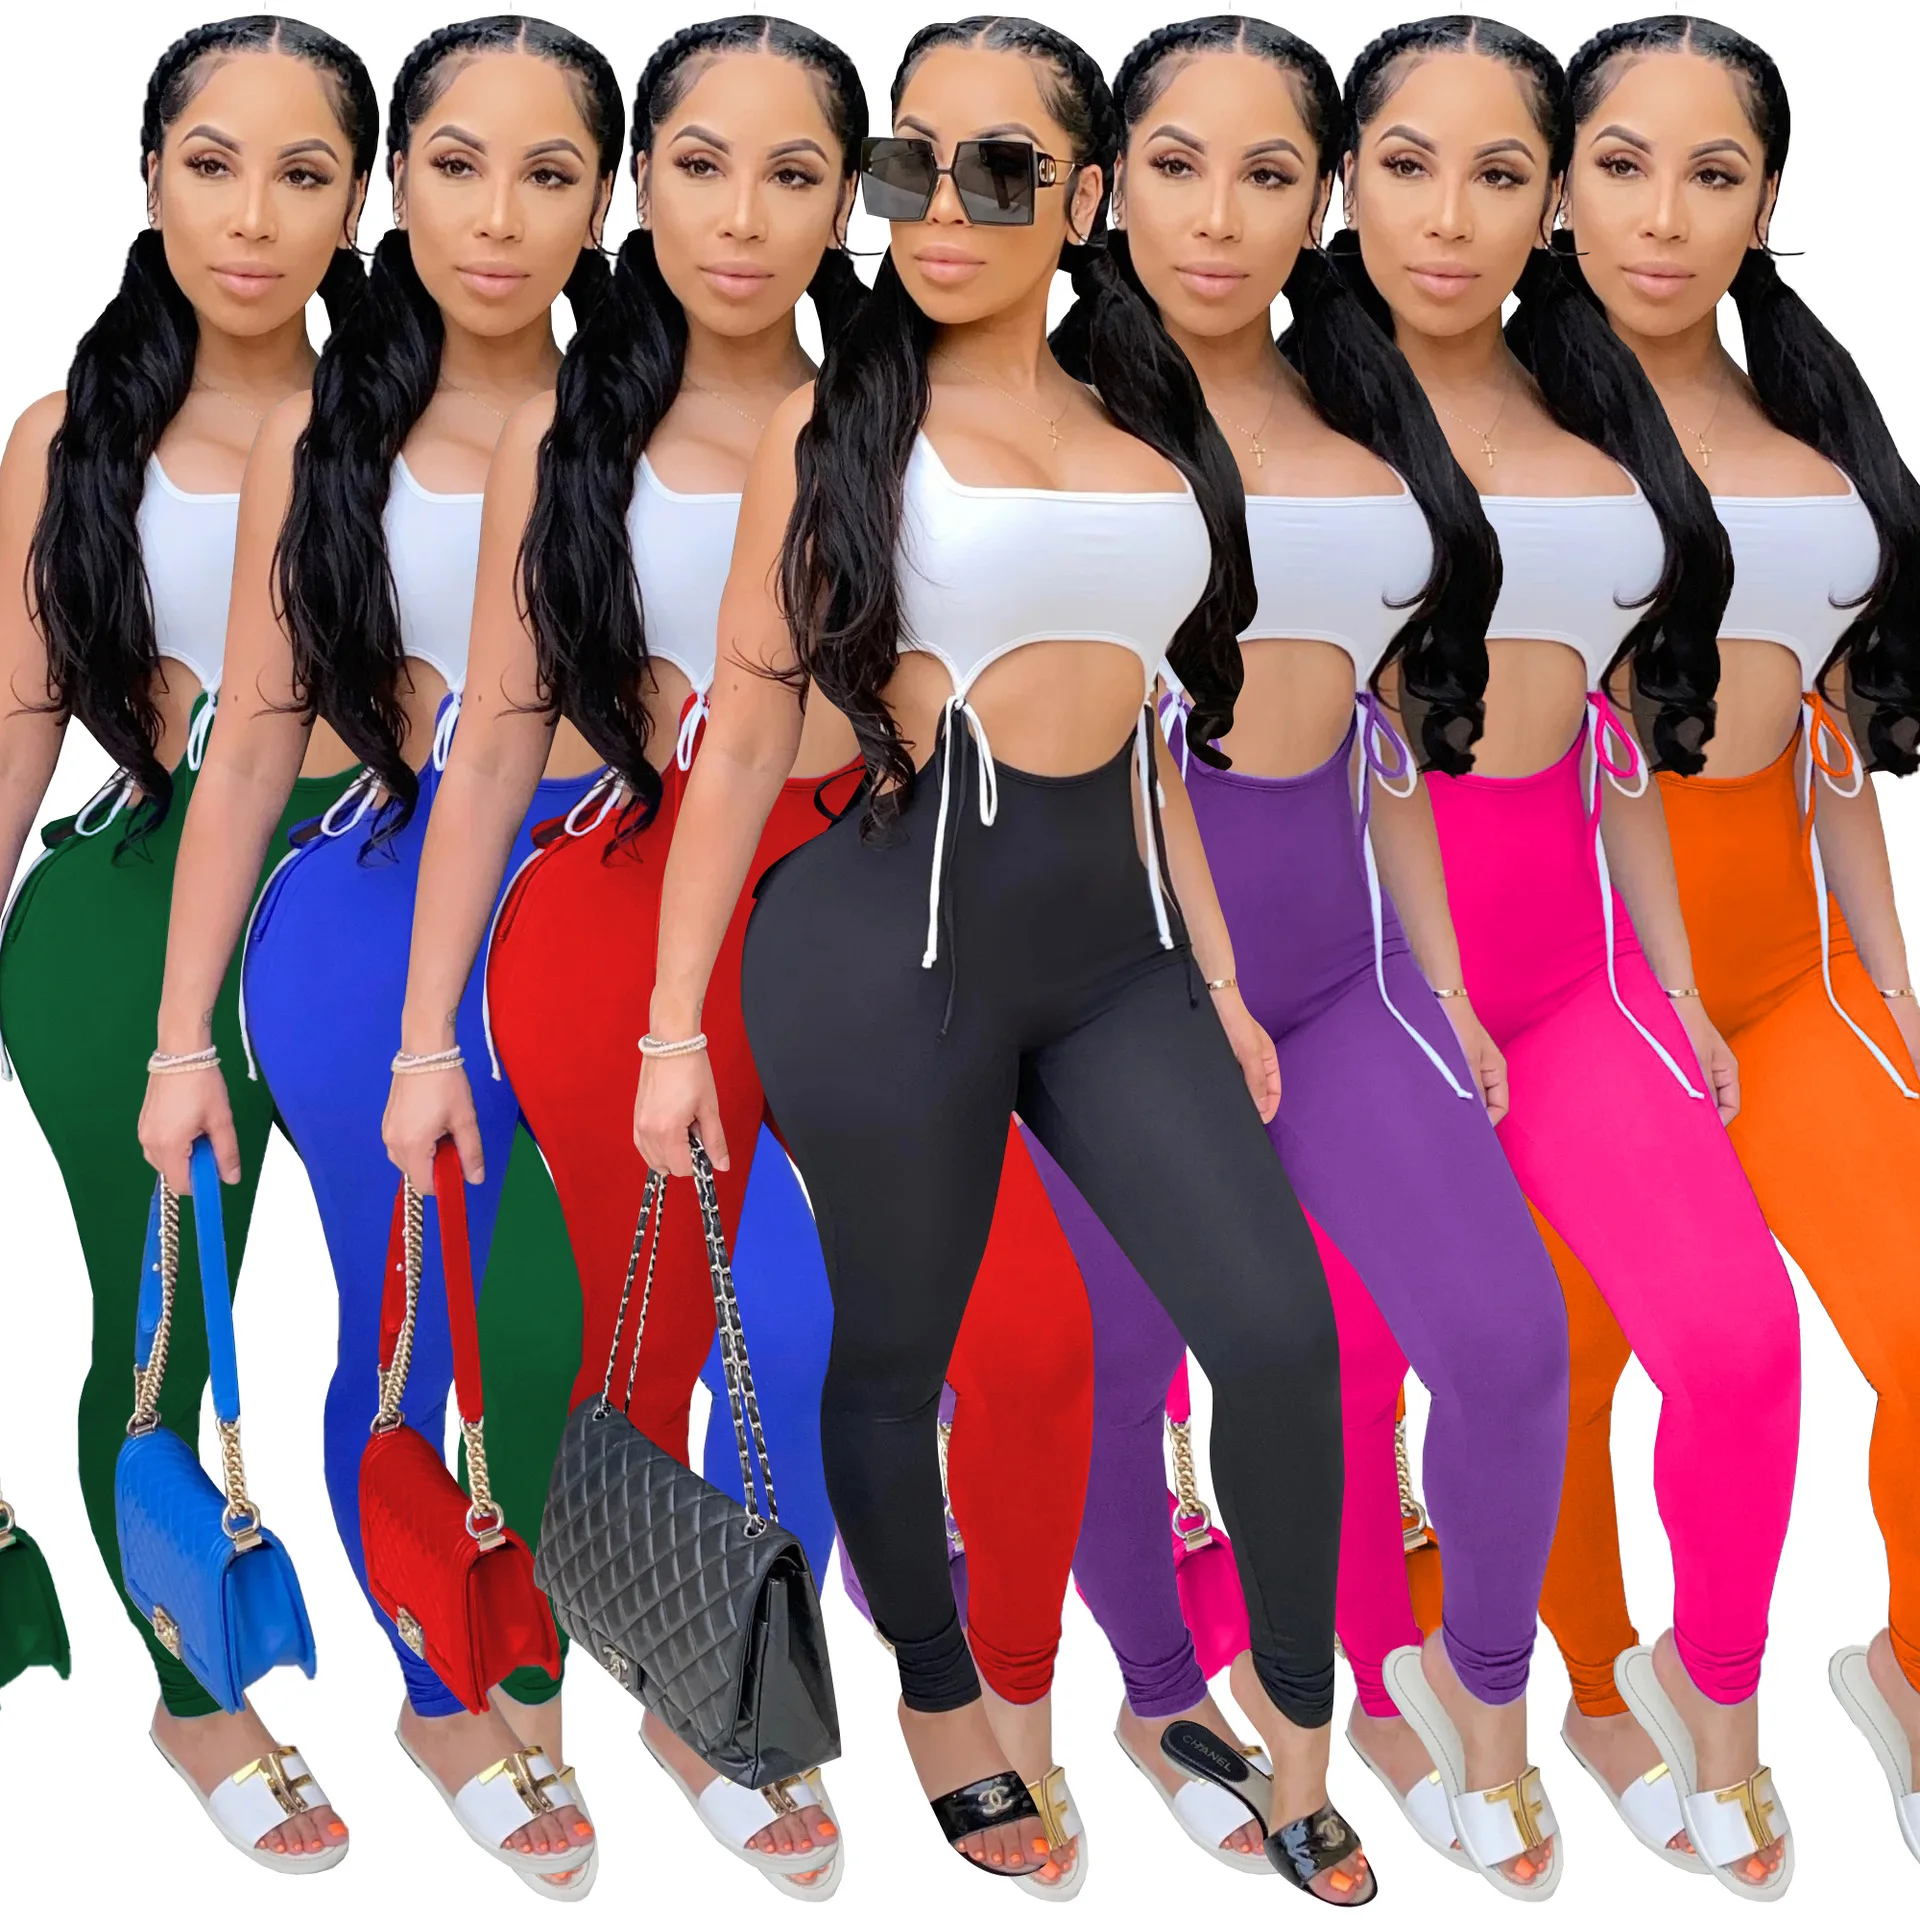 Hollow Out Patchwork Jumpsuit Rompers Trousers 2021 New Sexy Women Sleeveless Bodycon Jumpsuit Summer Sports Long Pants Jumpsuit sweet style love embroidered sports pants women girl spring autumn high waist loose thin hip hop comfortable trousers 2021 new